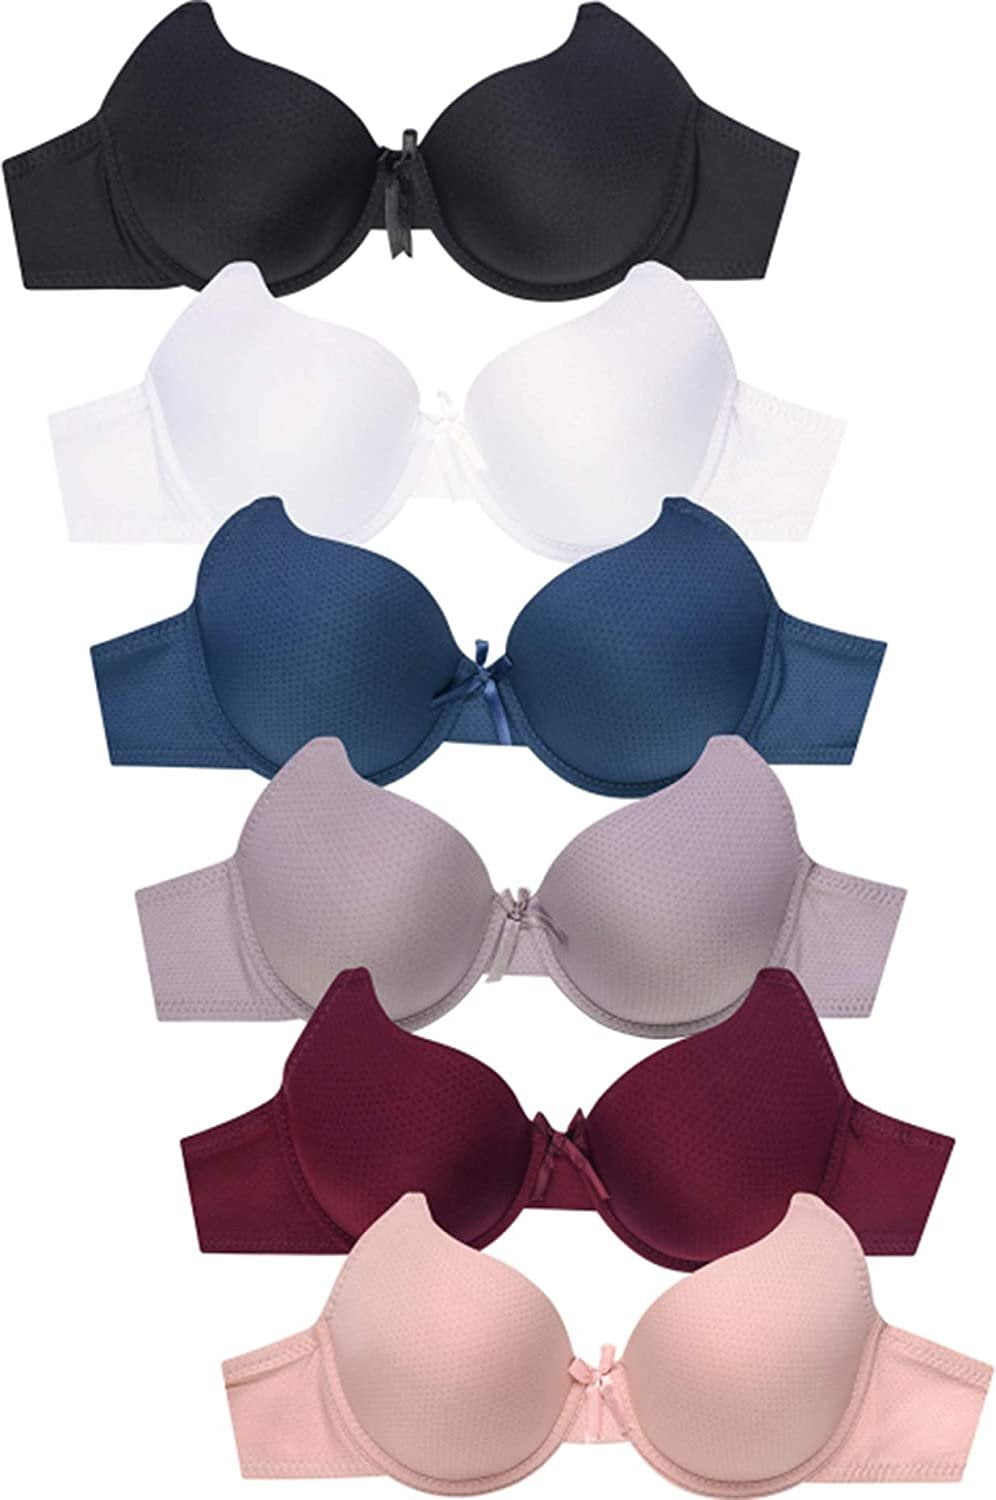 Women Bras 6 pack of Bra with all lace D DD DDD cup, Size 46DDD (9116)